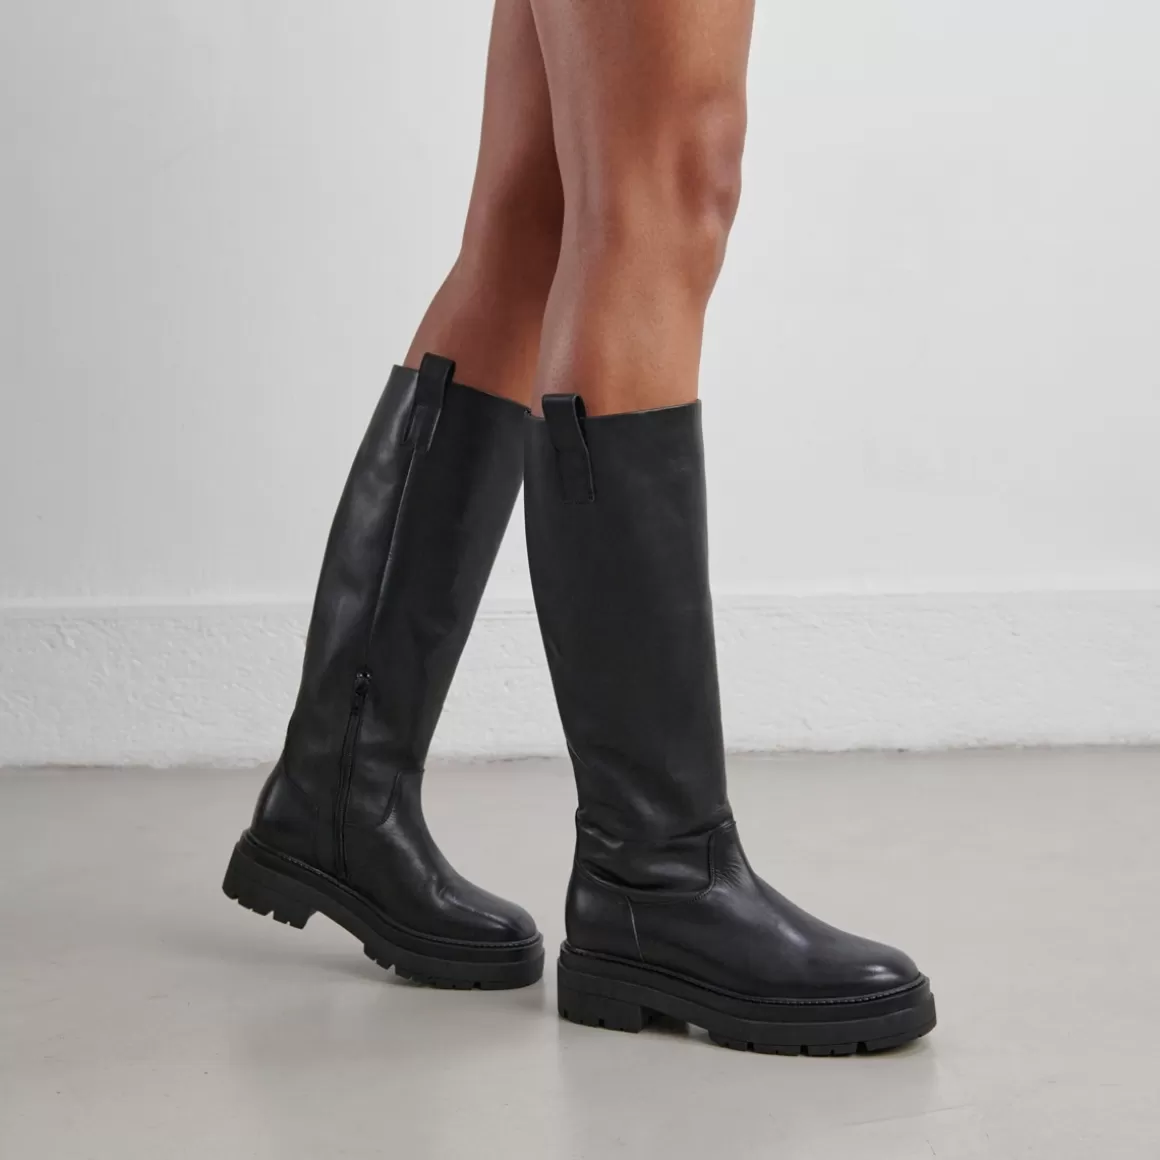 Boots with notched soles and square toe<Jonak Hot